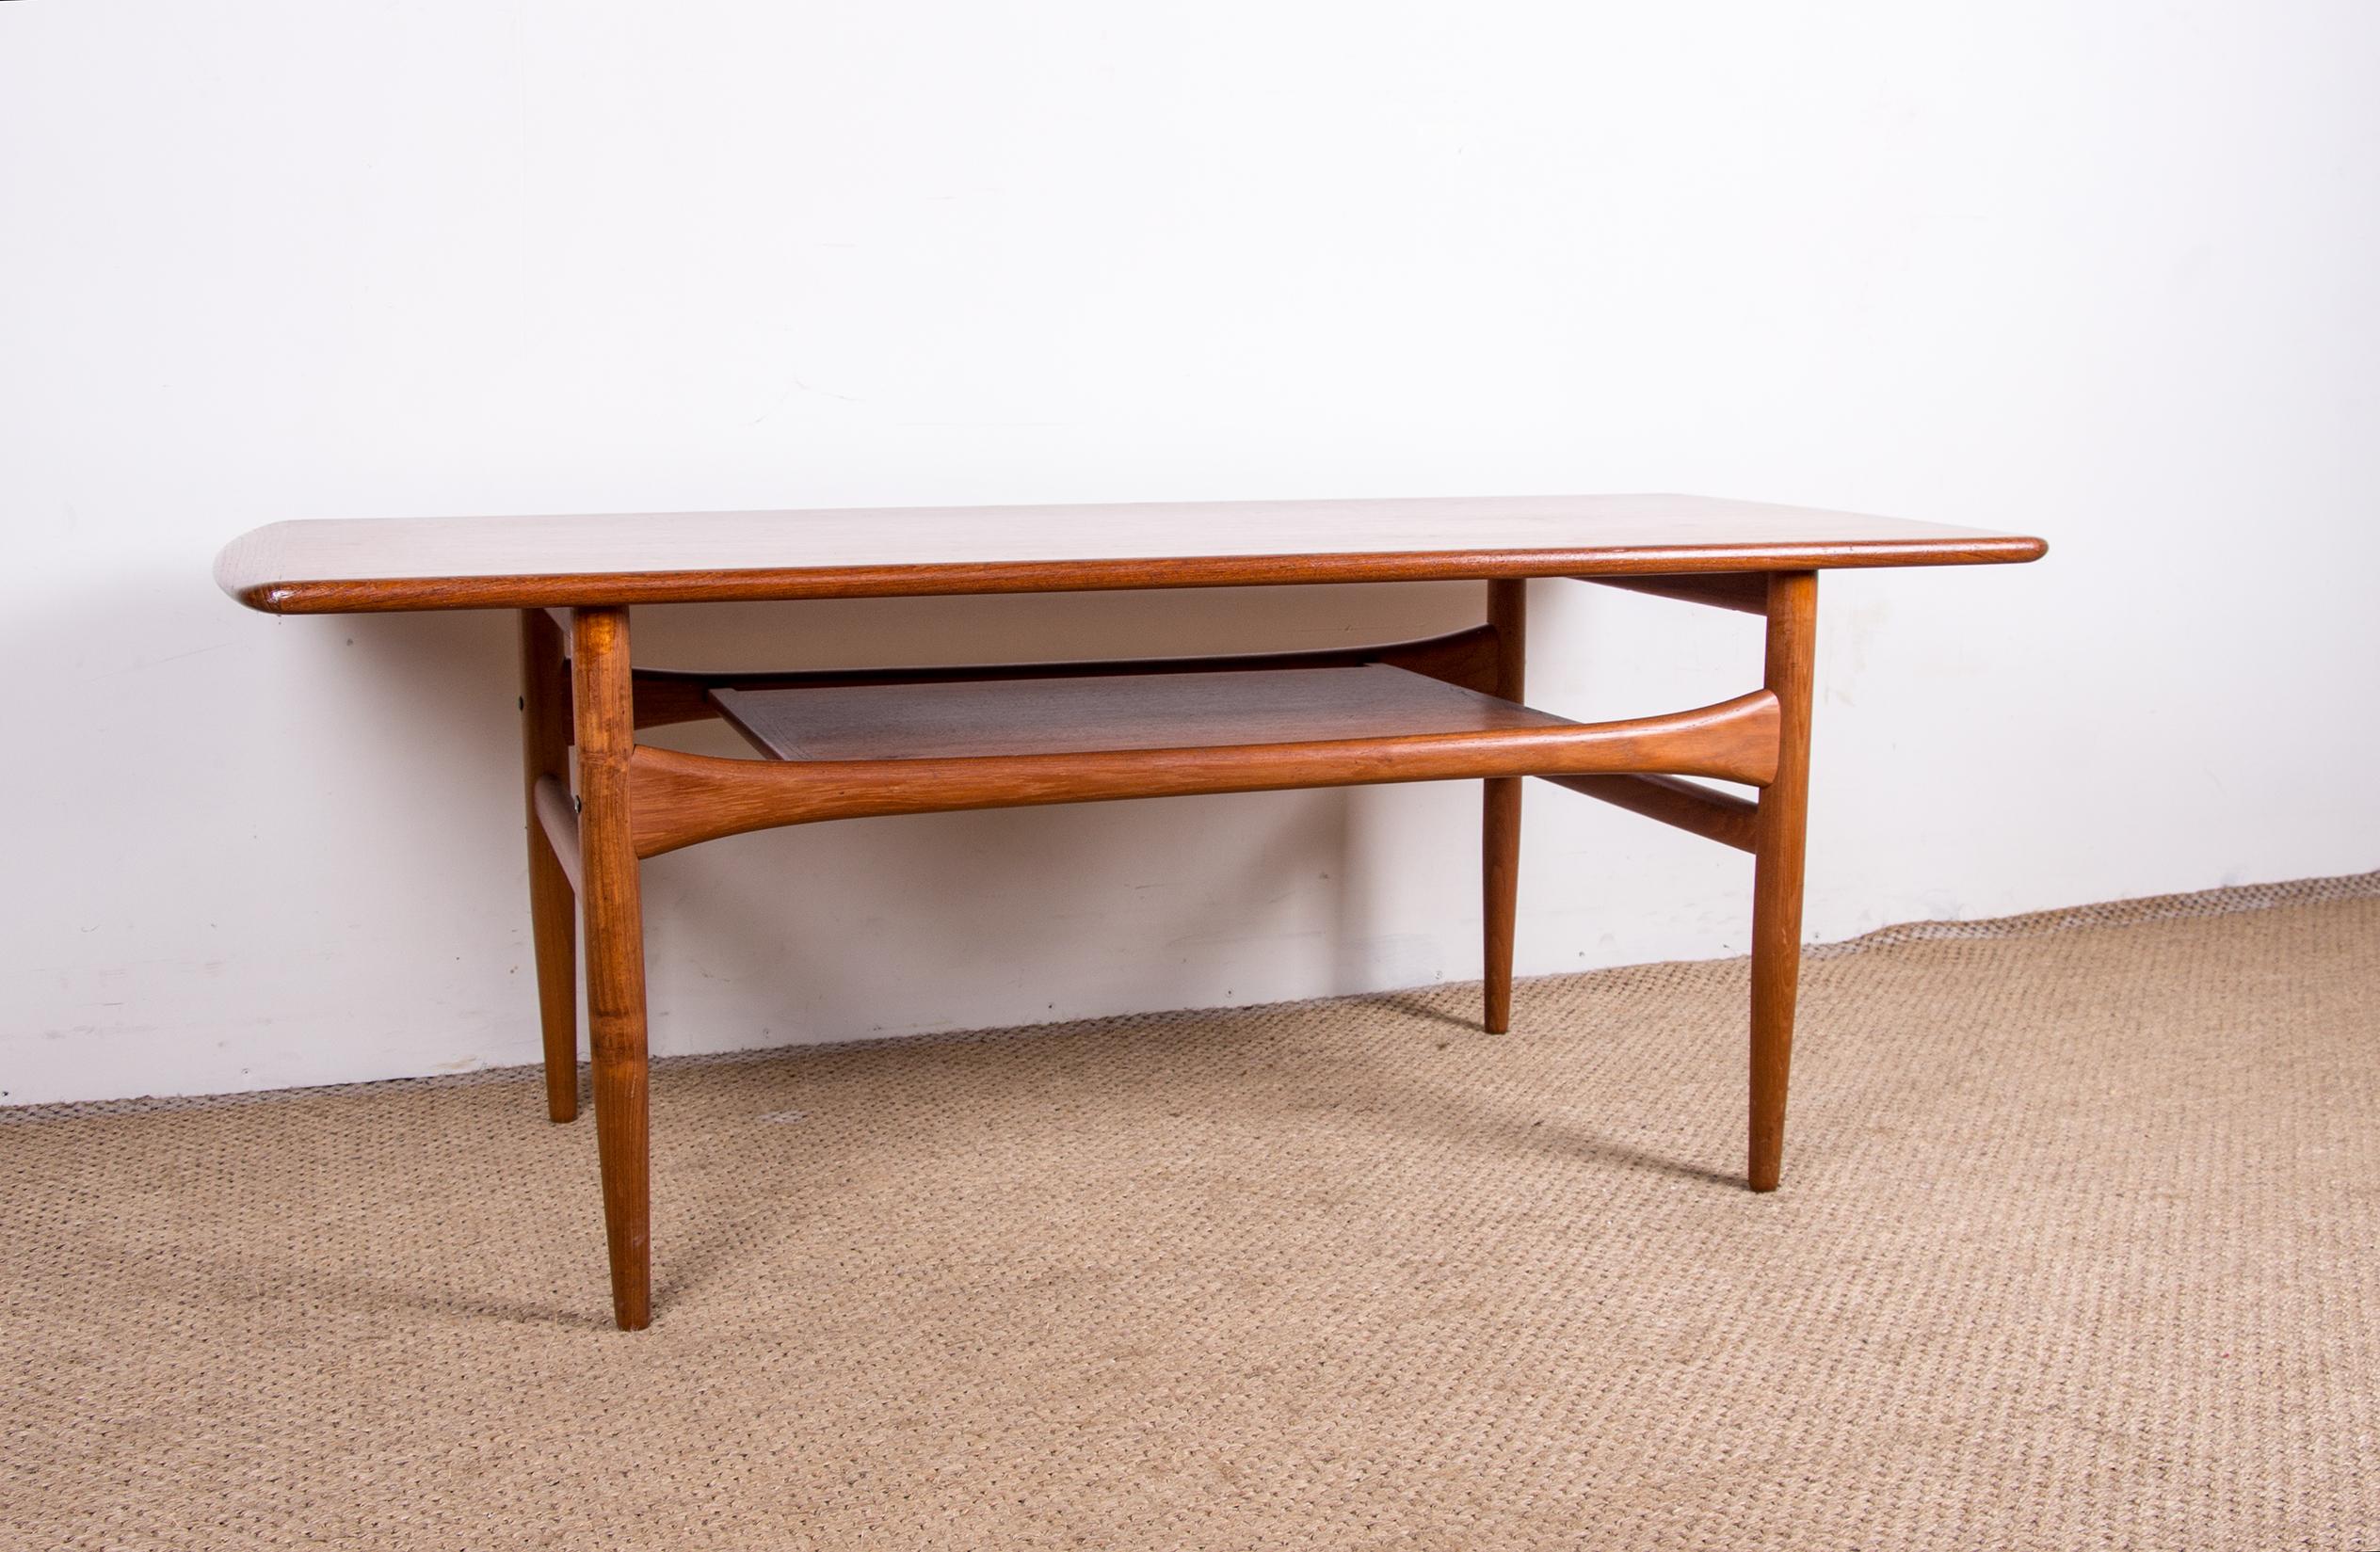 Beautiful Scandinavian coffee table. It has a wooden lower level for more storage. Very elegant aerial design, tapered legs, curved top across the width. Very good build quality.